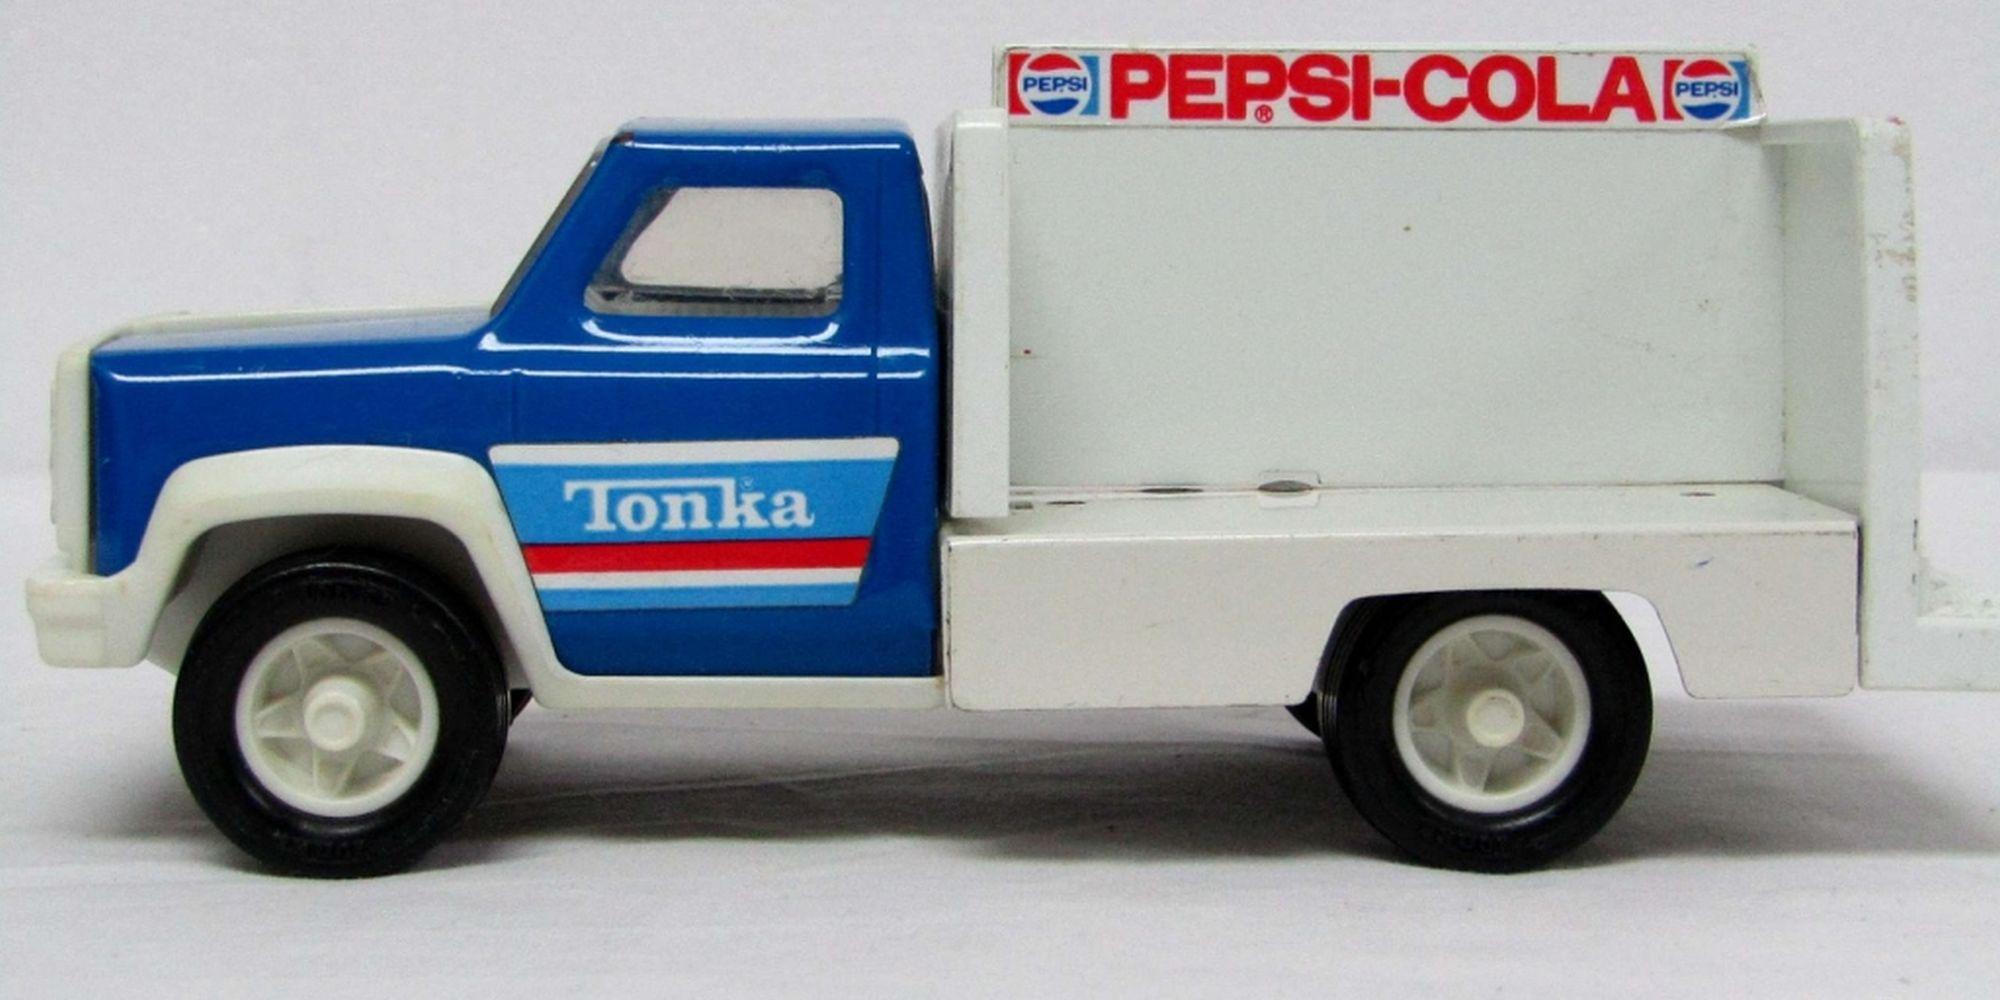 VINTAGE 1970'S PEPSI-COLA TOY DELIVERY TRUCK